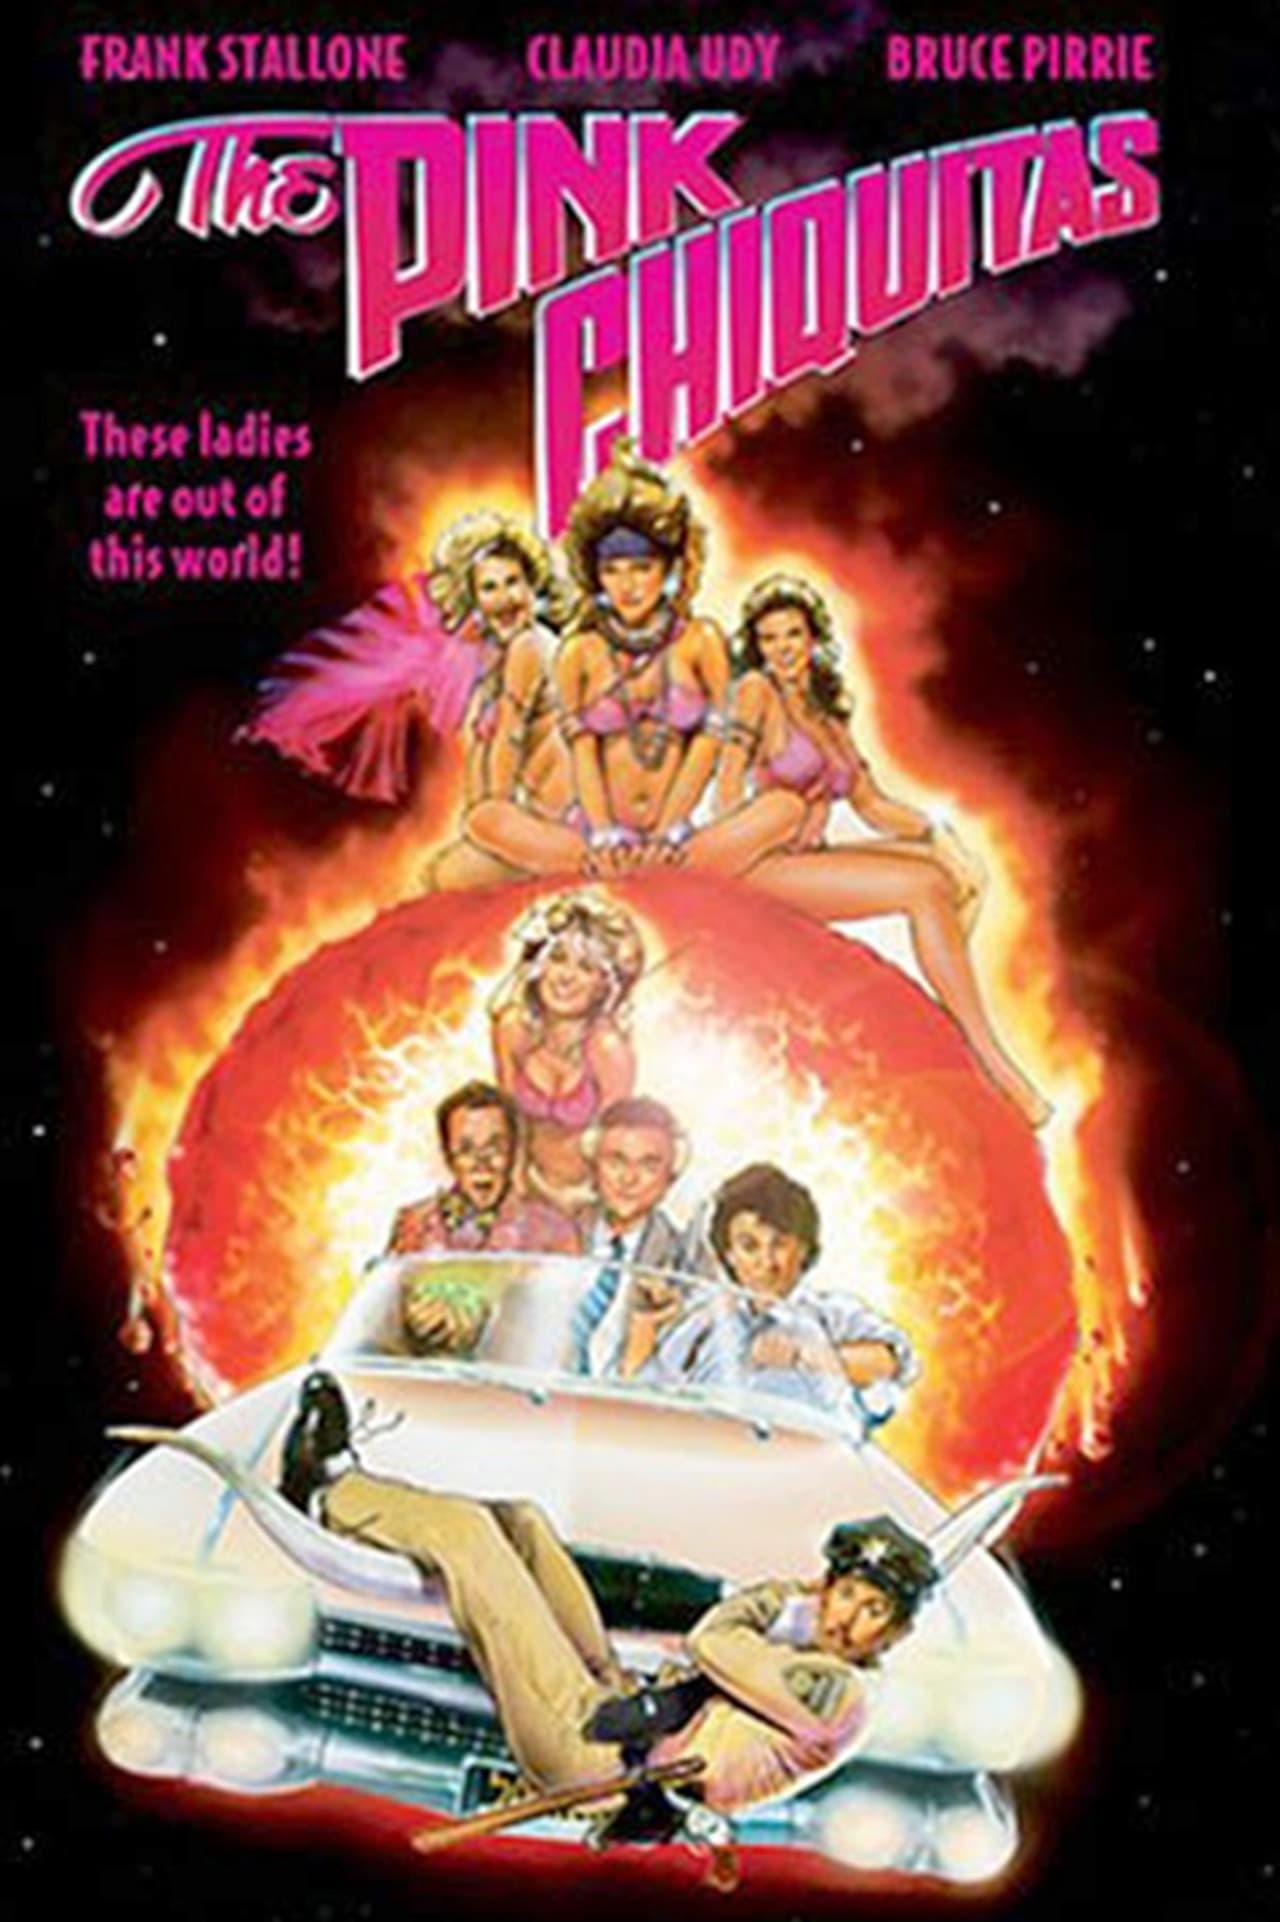 The Pink Chiquitas poster